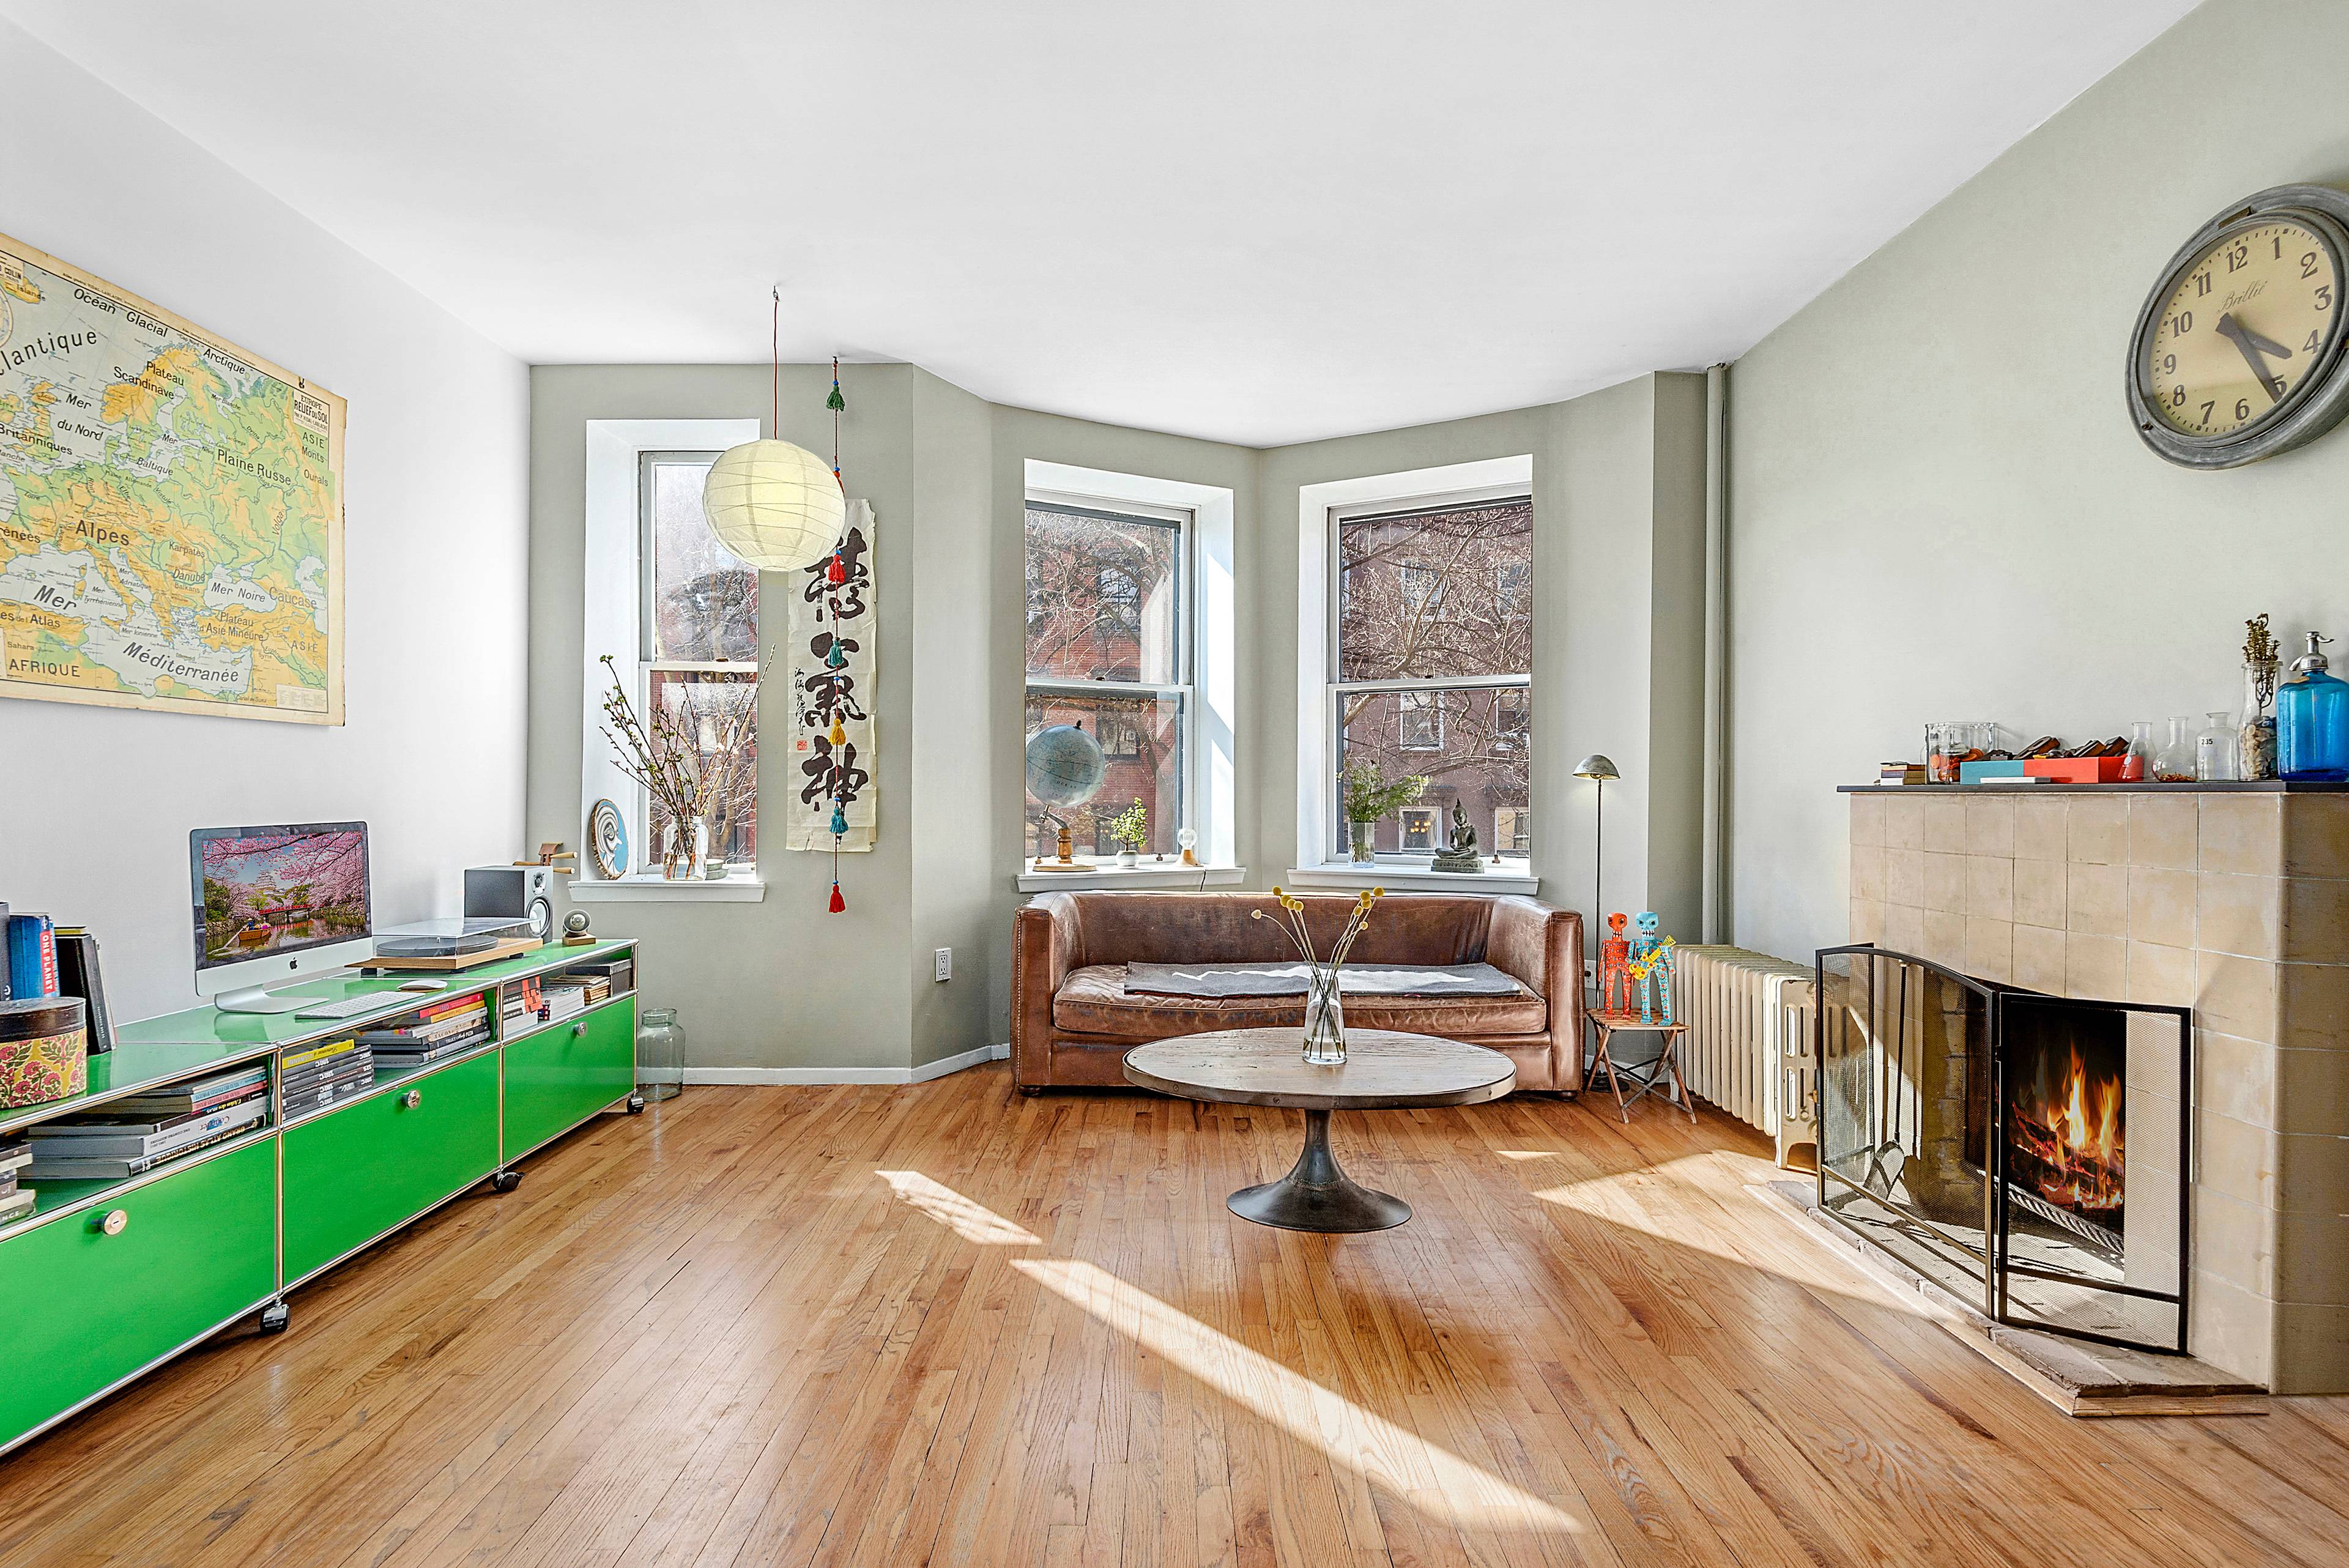 Traditional architectural charm and modern luxury of blend within a well appointed boutique co op are found here at 209 Clinton Street in Cobble Hill.